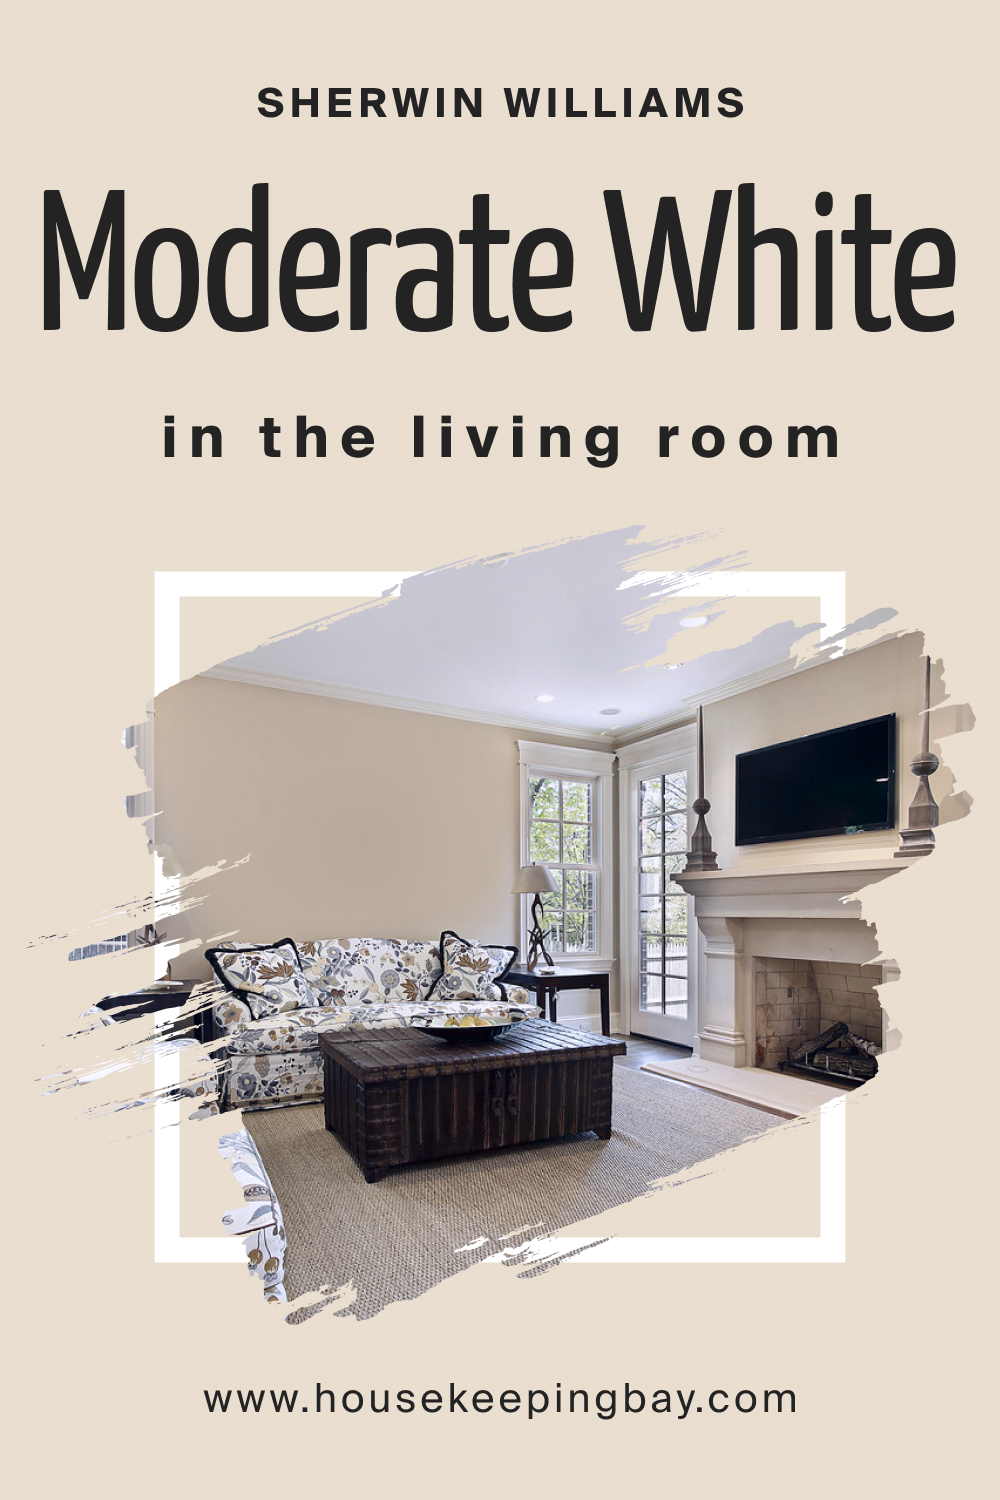 Sherwin Williams. SW Moderate White In the Living Room